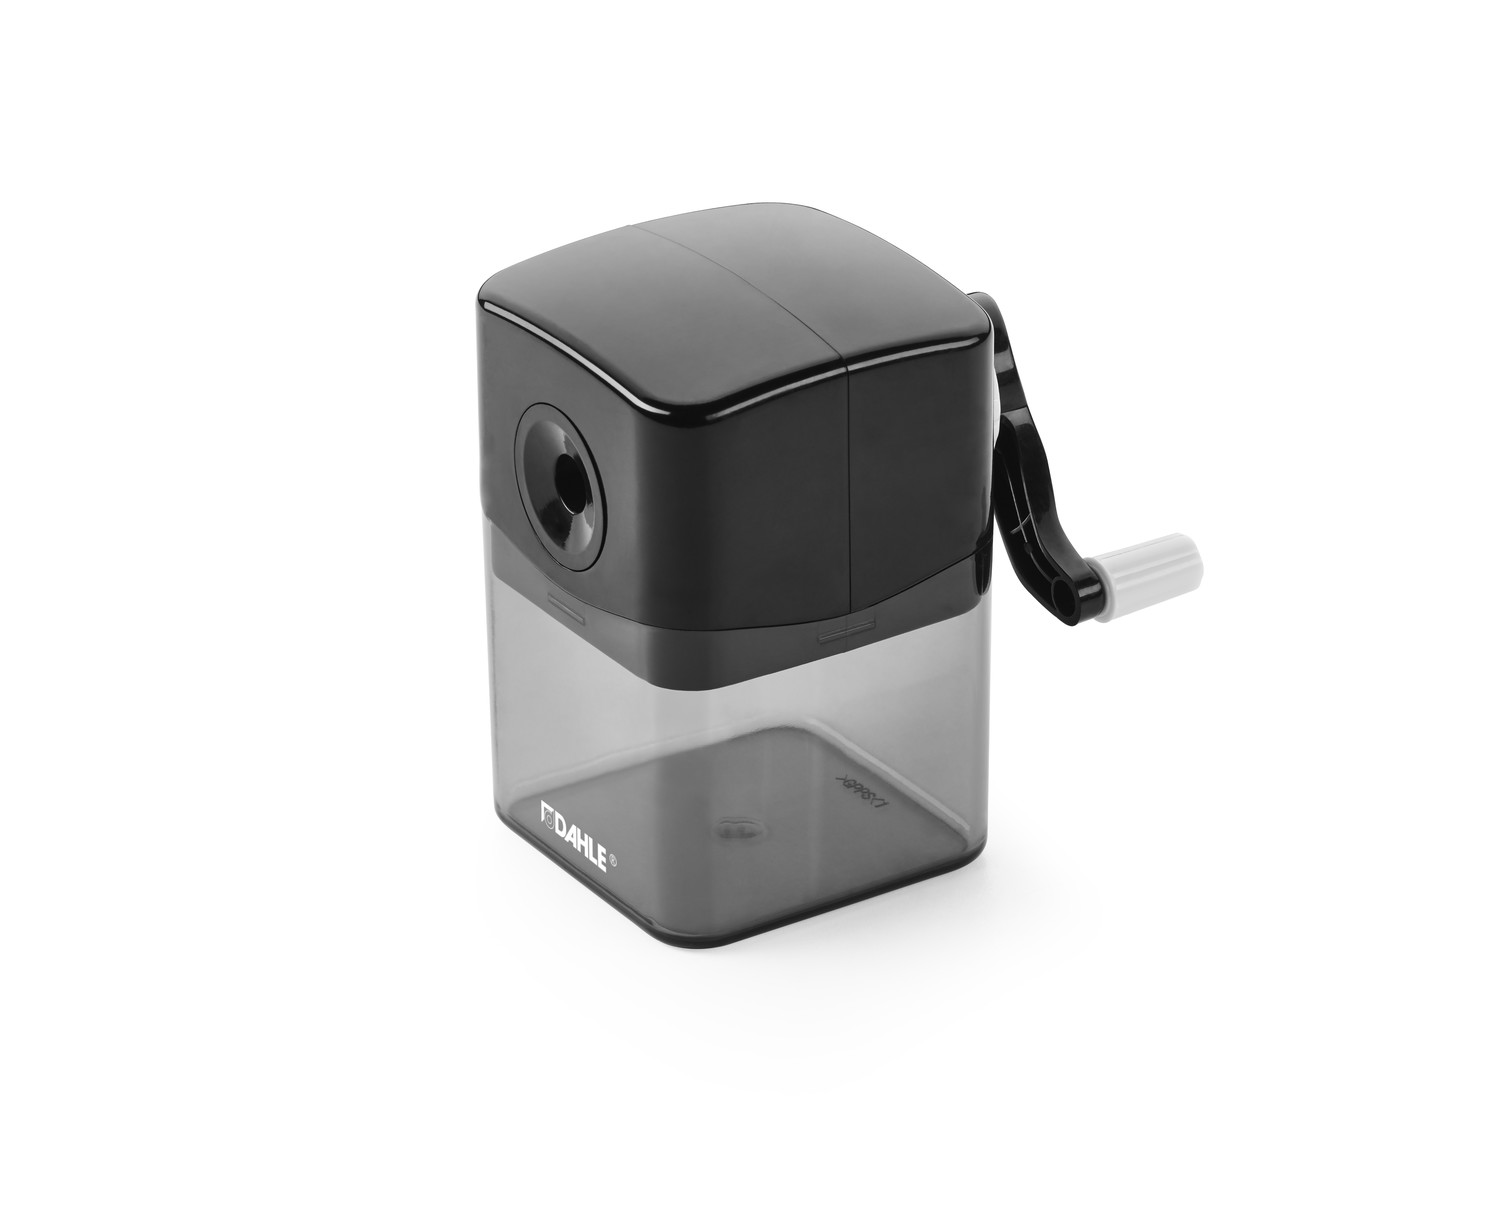 Dahle 133 Pencil Sharpener with Automatic Cutting System, Adjustable Point,  Accepts Standard Graphite or Oversized Artist Pencils